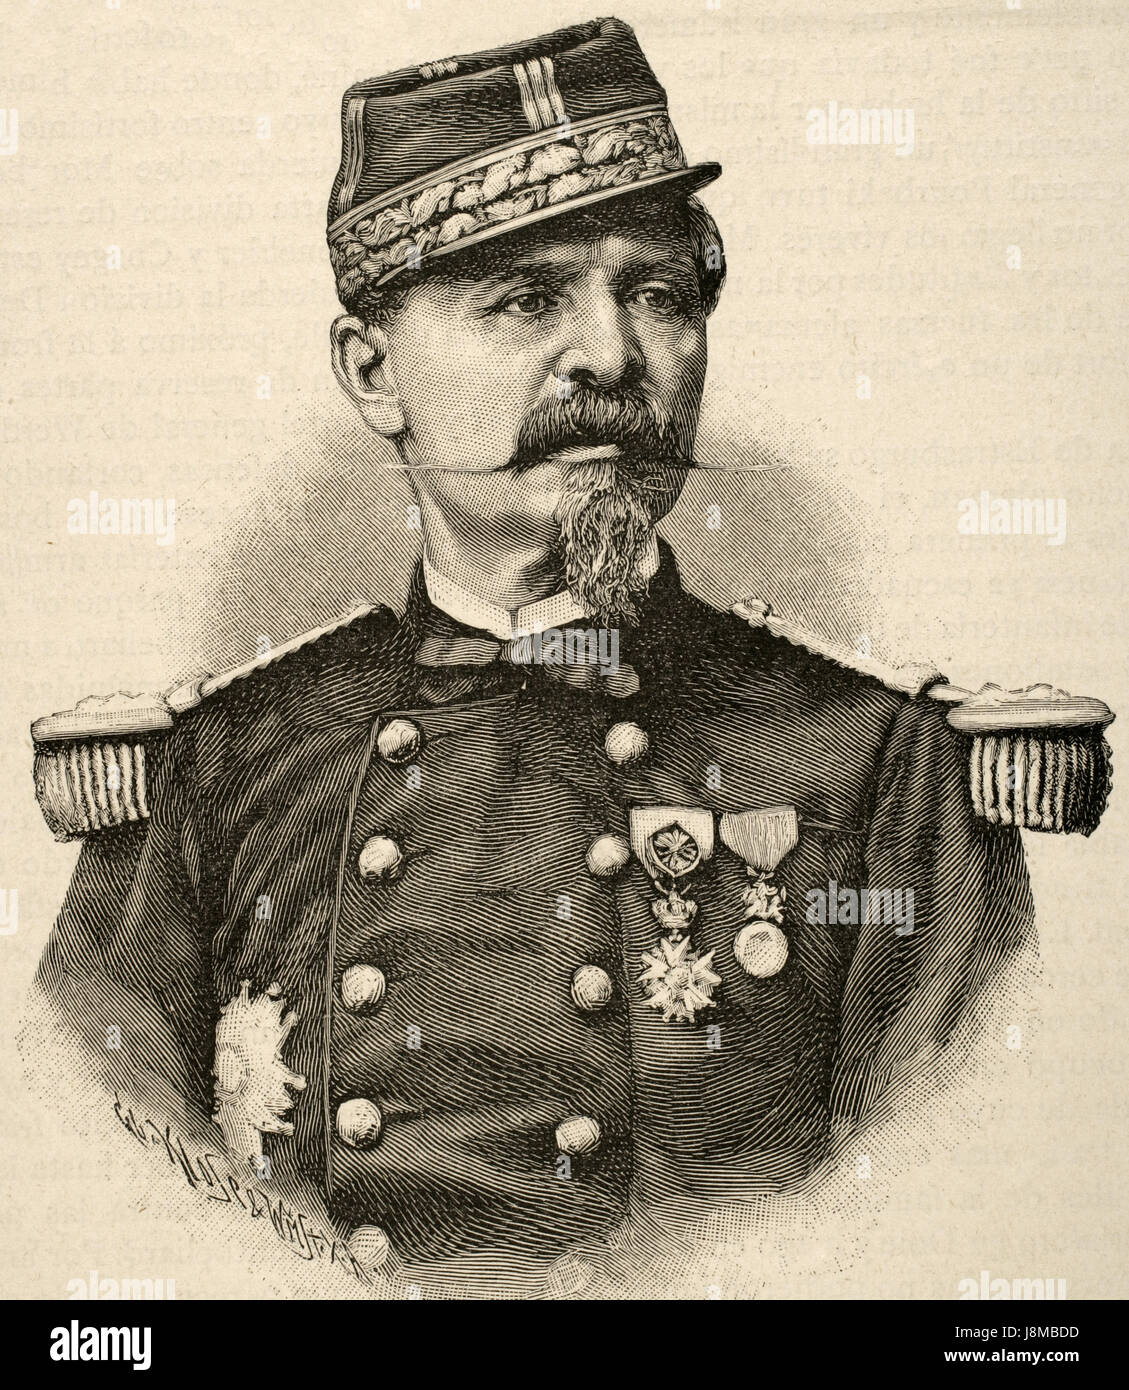 Antoine Chanzy (1823-1883). French general and governor of Algeria. Portrait. Engraving by Klose. 'Historia de Francia', 1883. Stock Photo